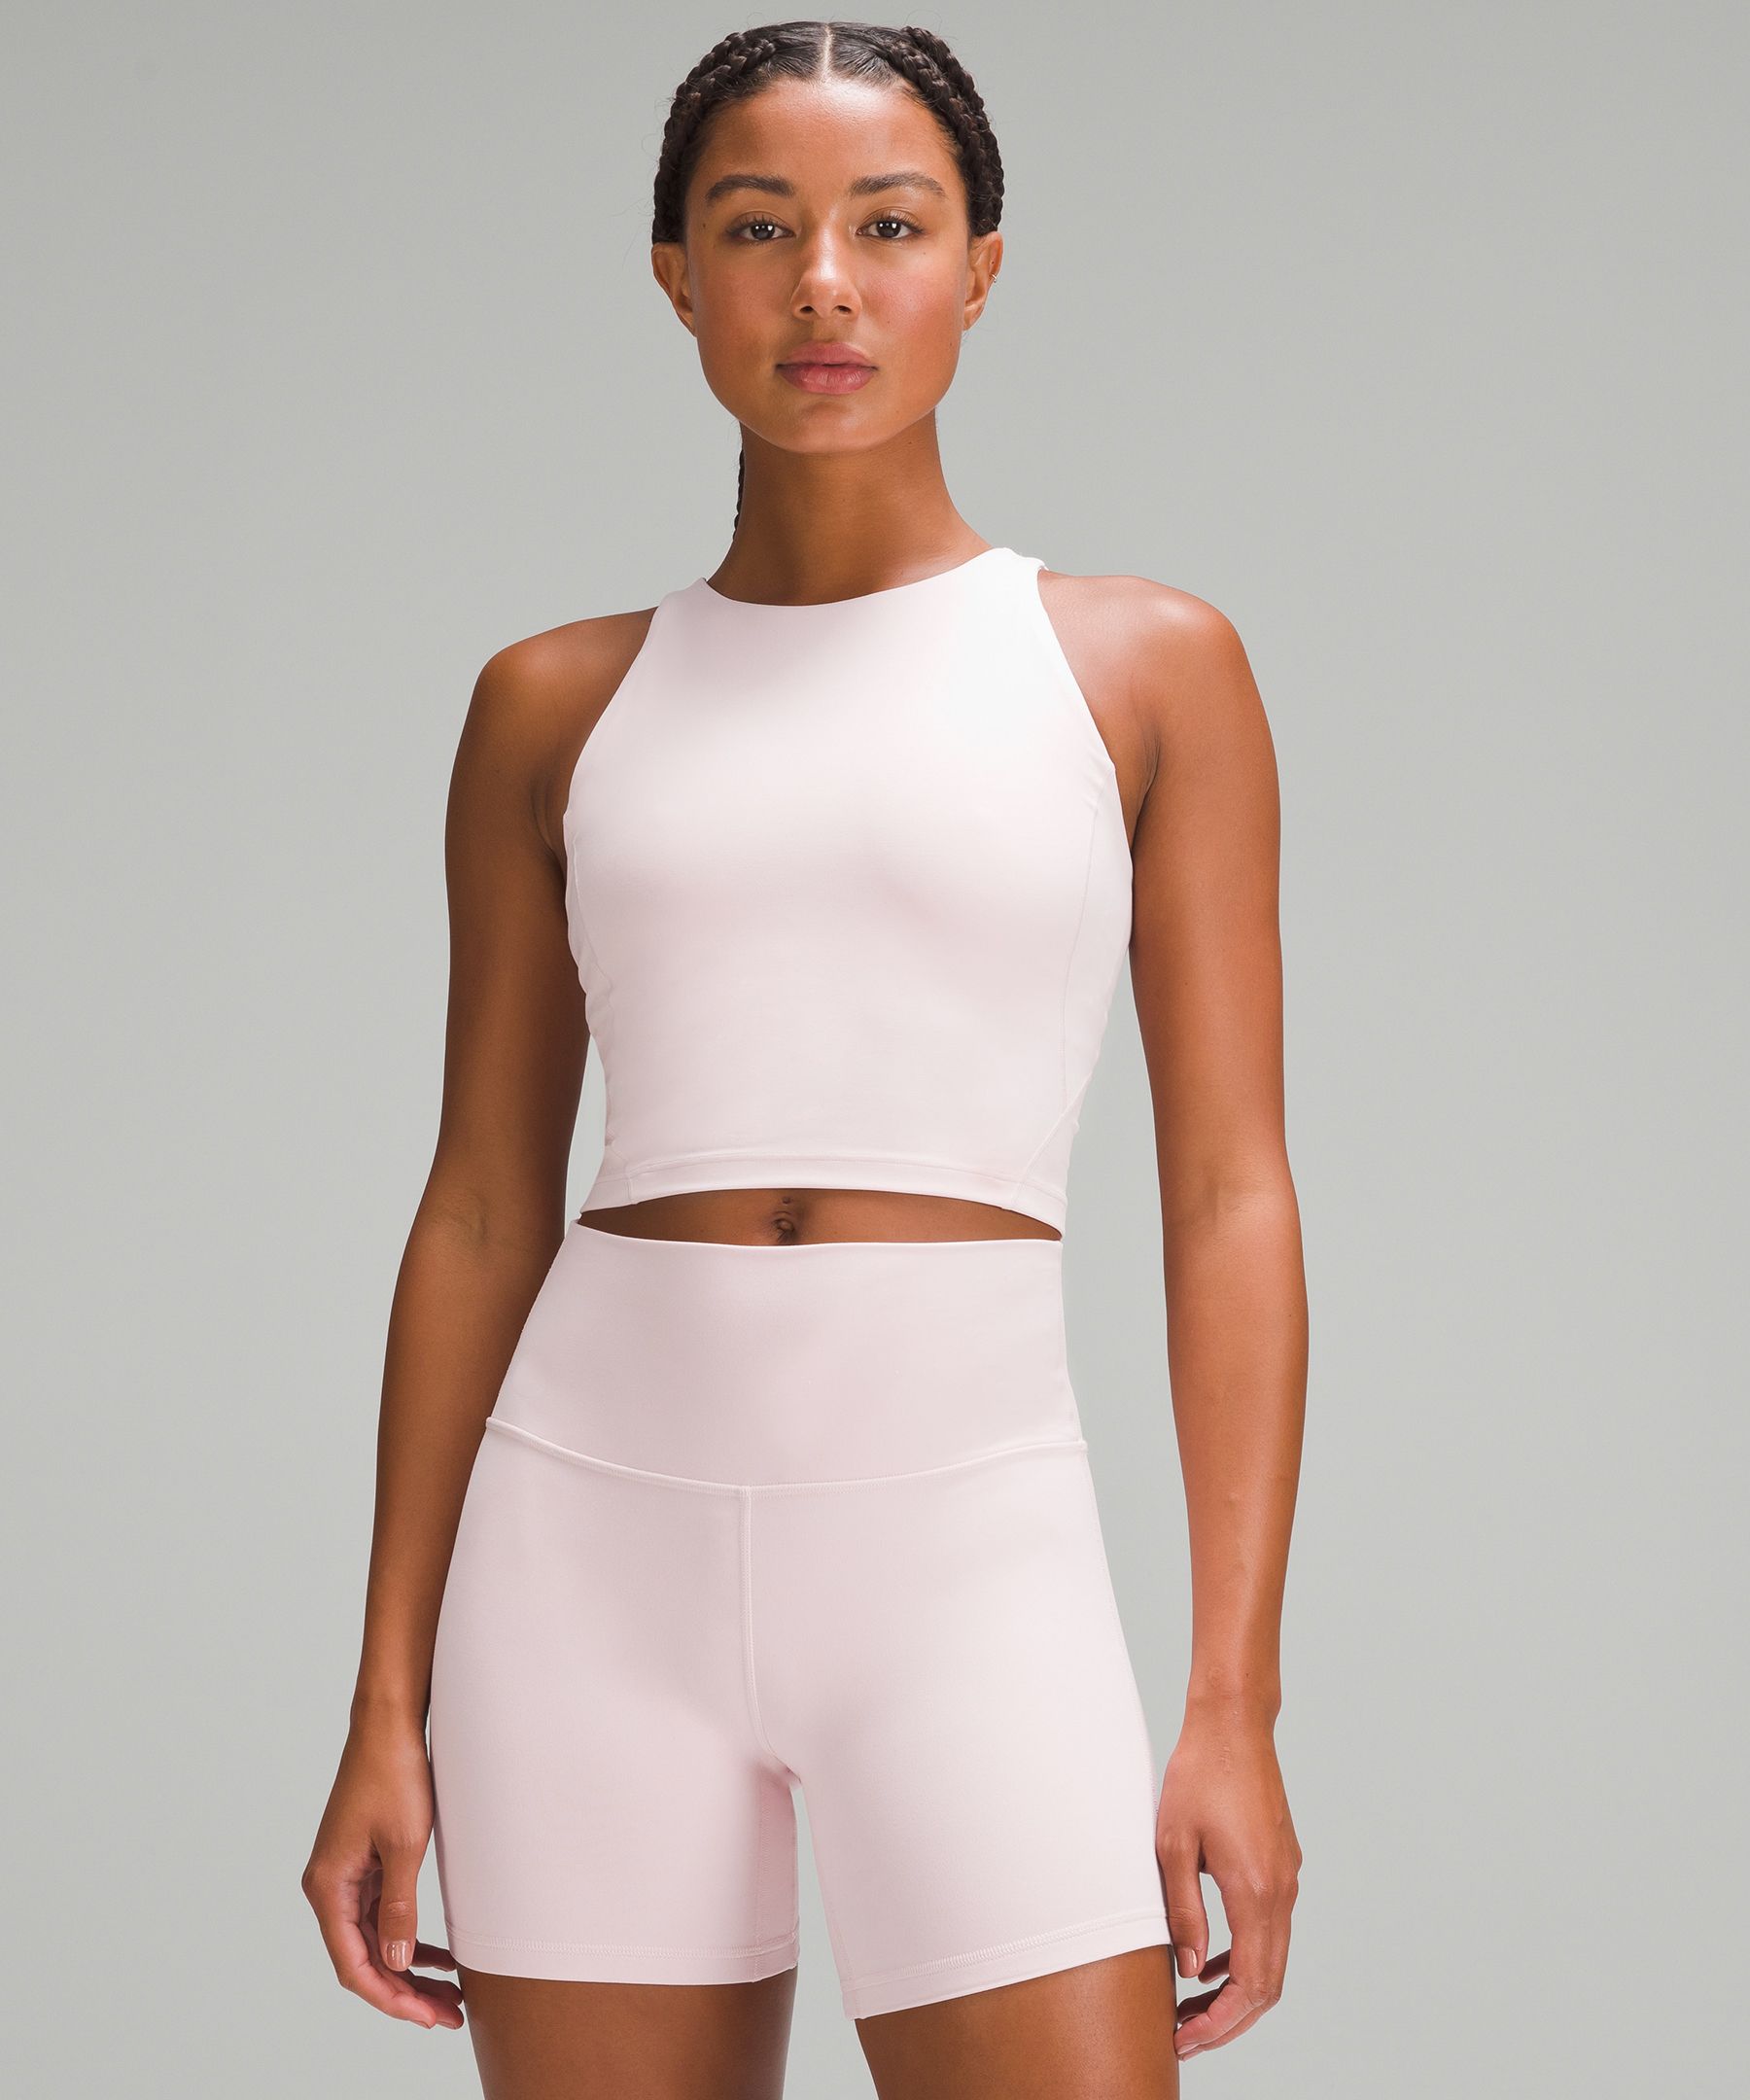 high neck align tank + black groove pants 💕 pink taupe is dreamy